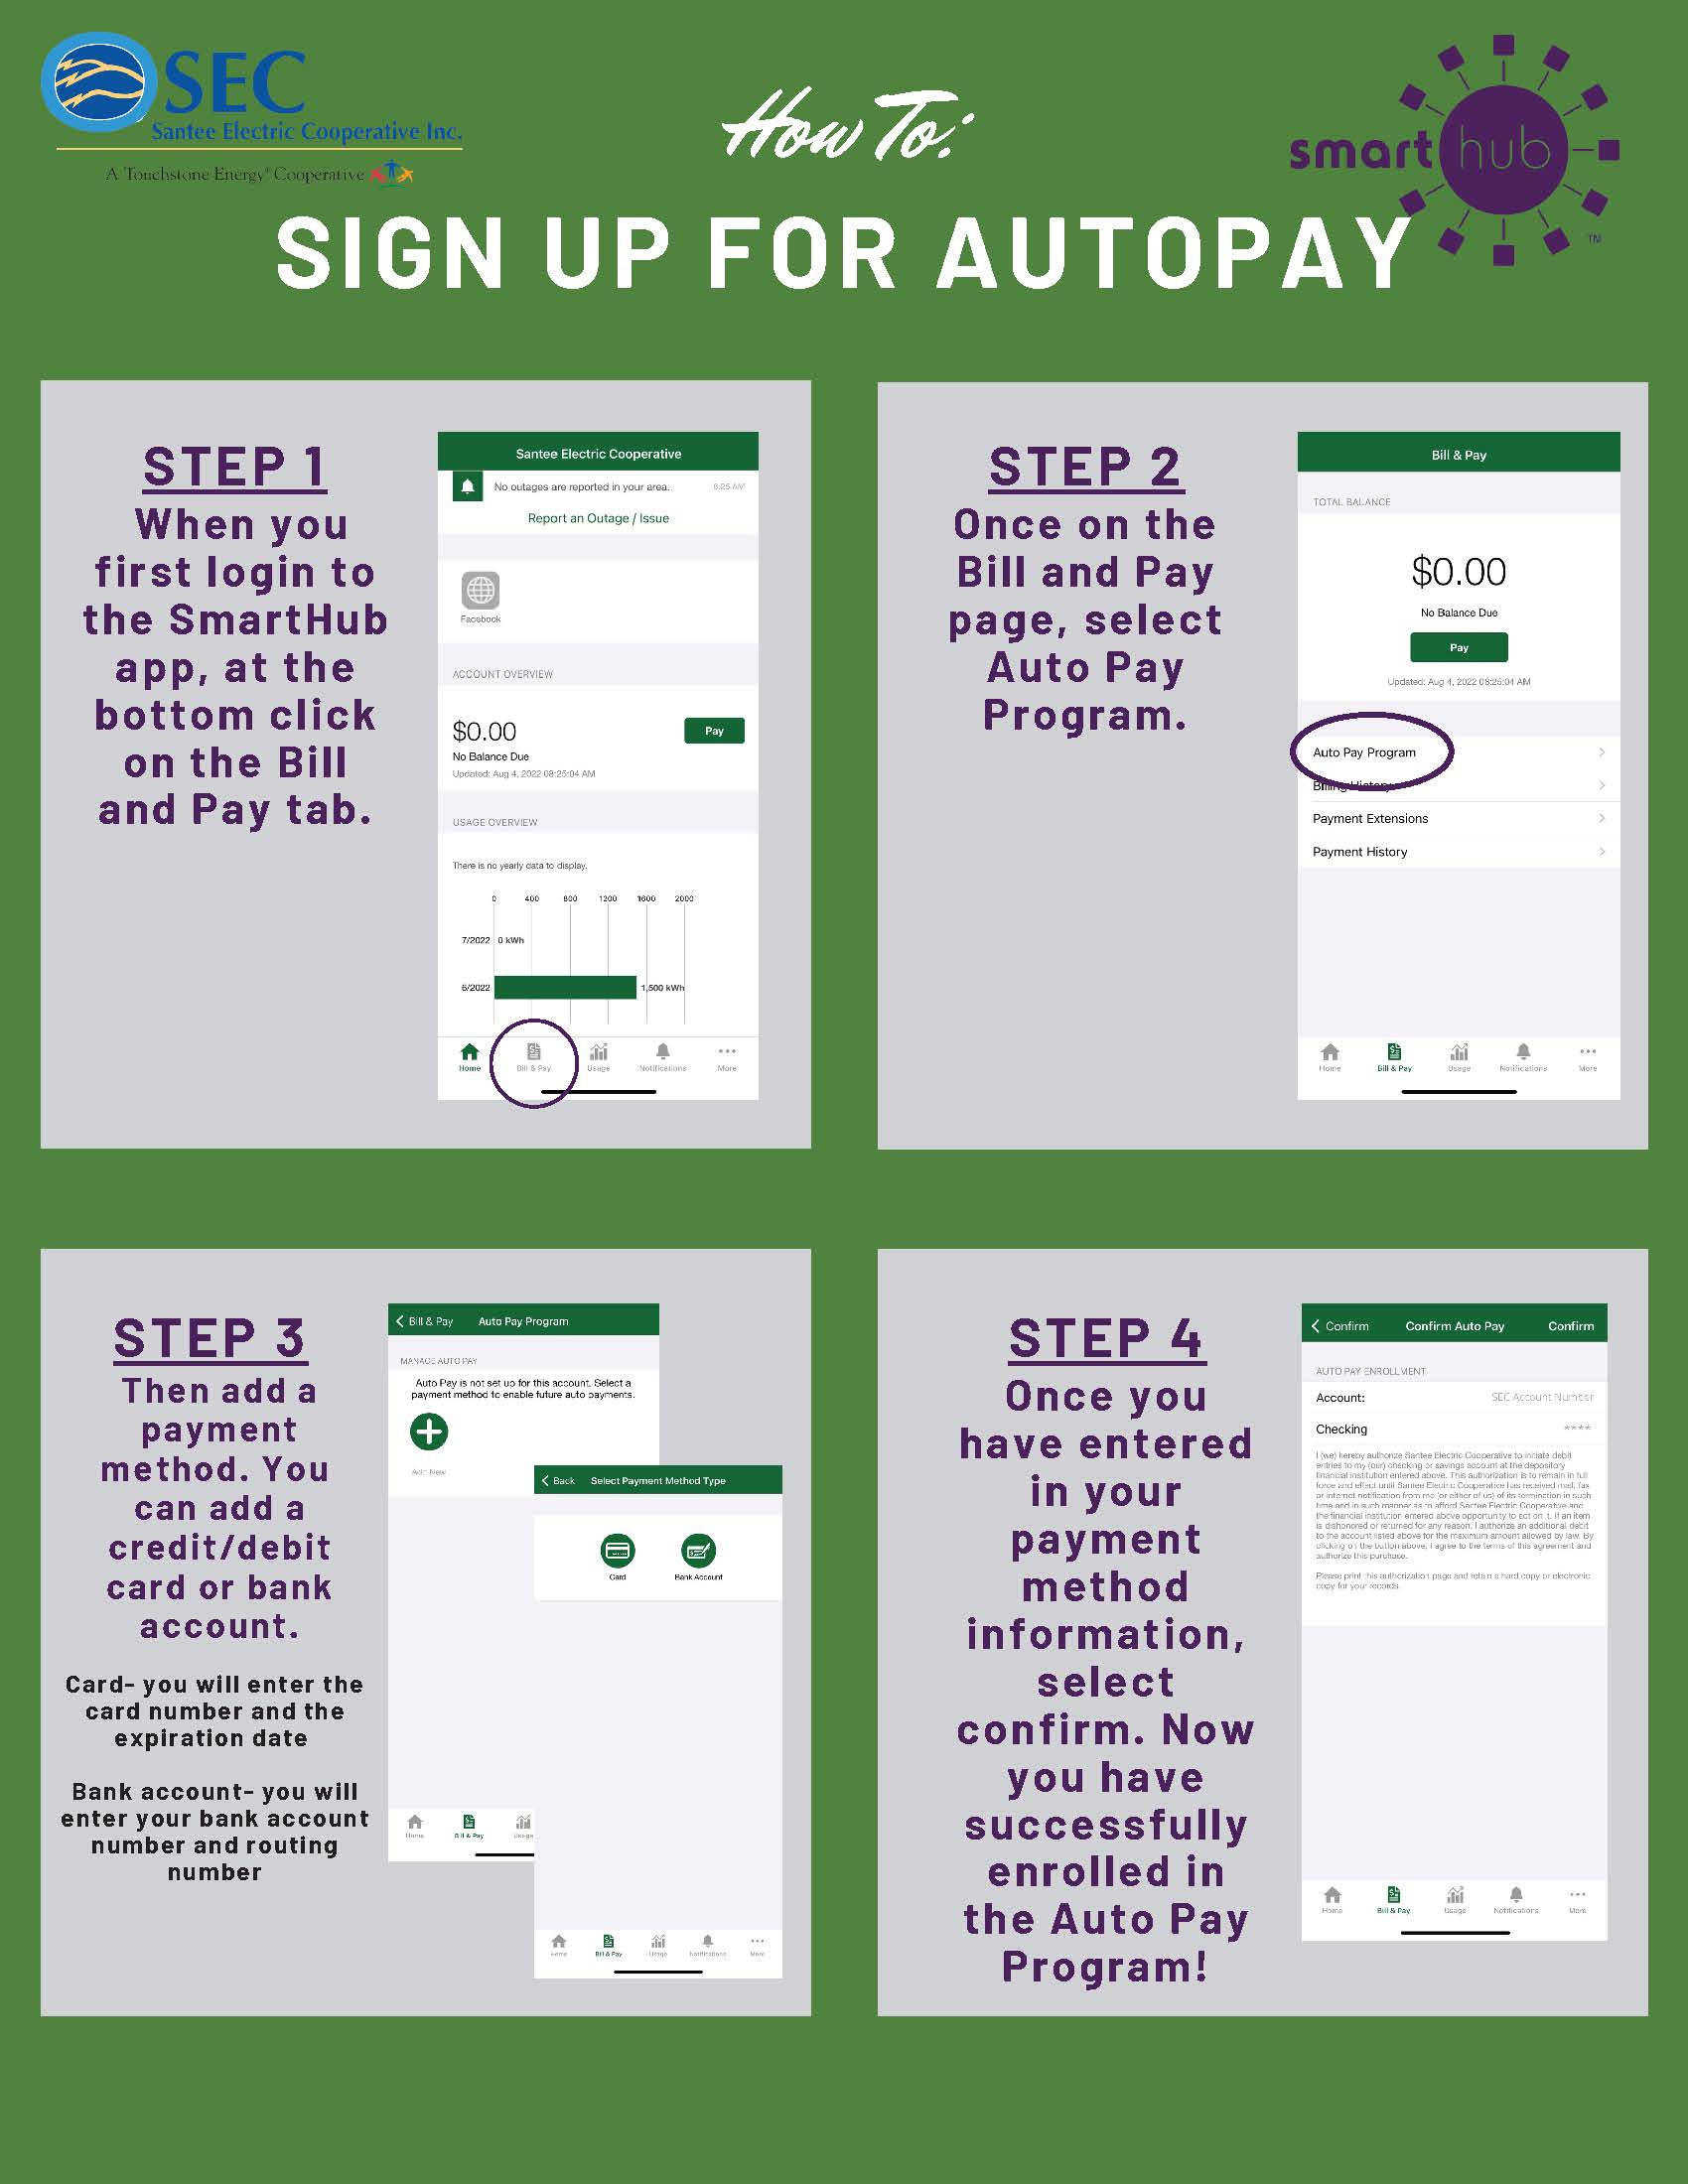 How to sign up for auto pay